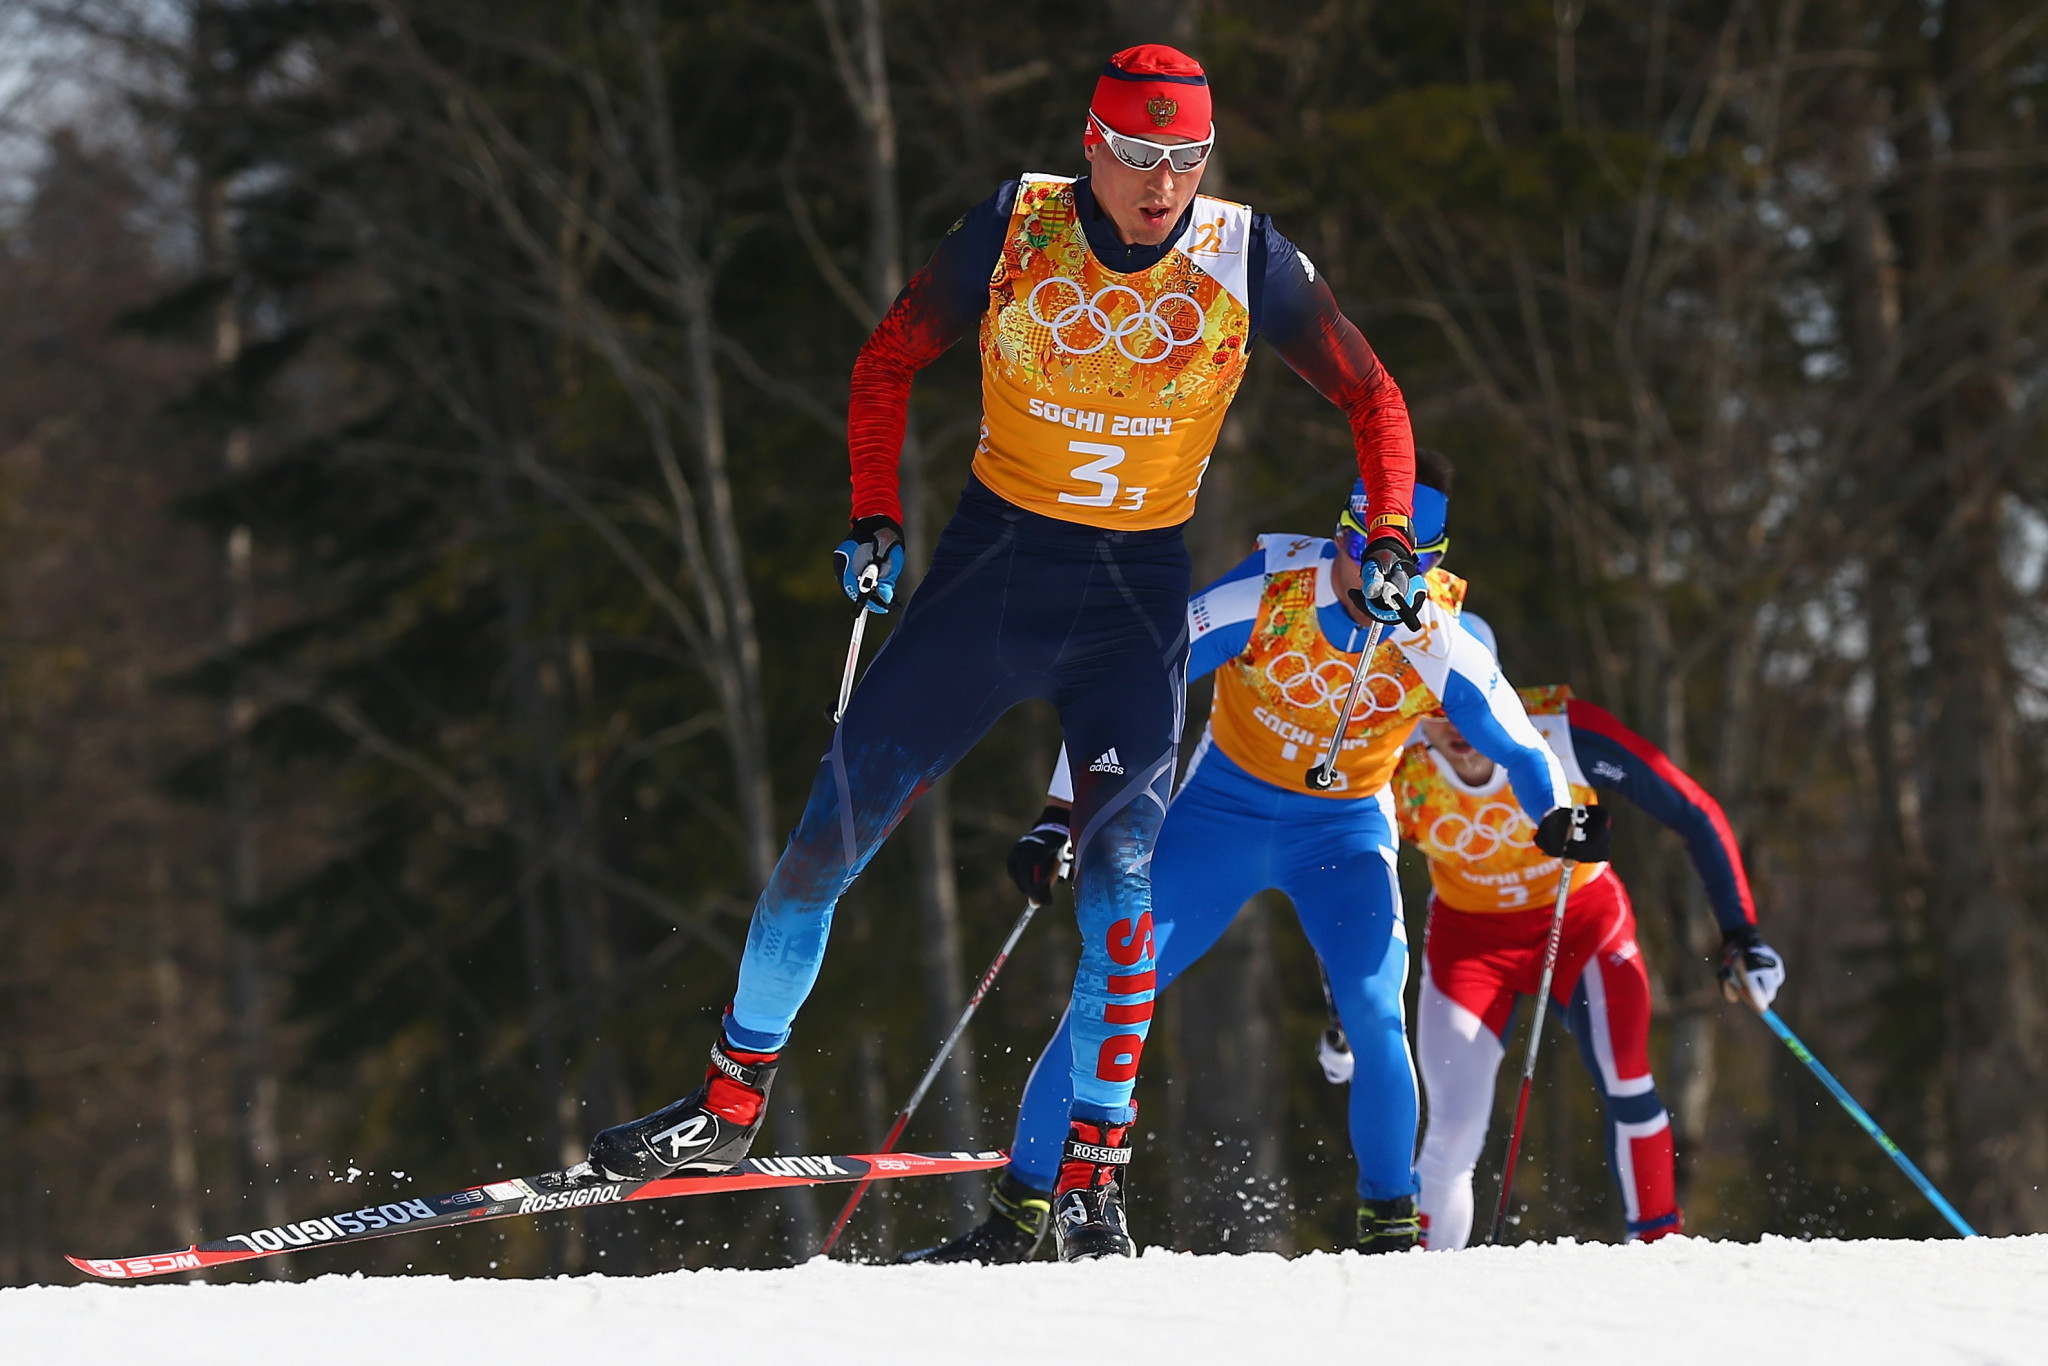 Russian cross-country skier Alexander Legkov has been disqualified and stripped of the gold medal he won at Sochi 2014 after being found guilty of being involved in a scheme where drugs samples were tampered with ©Getty Images